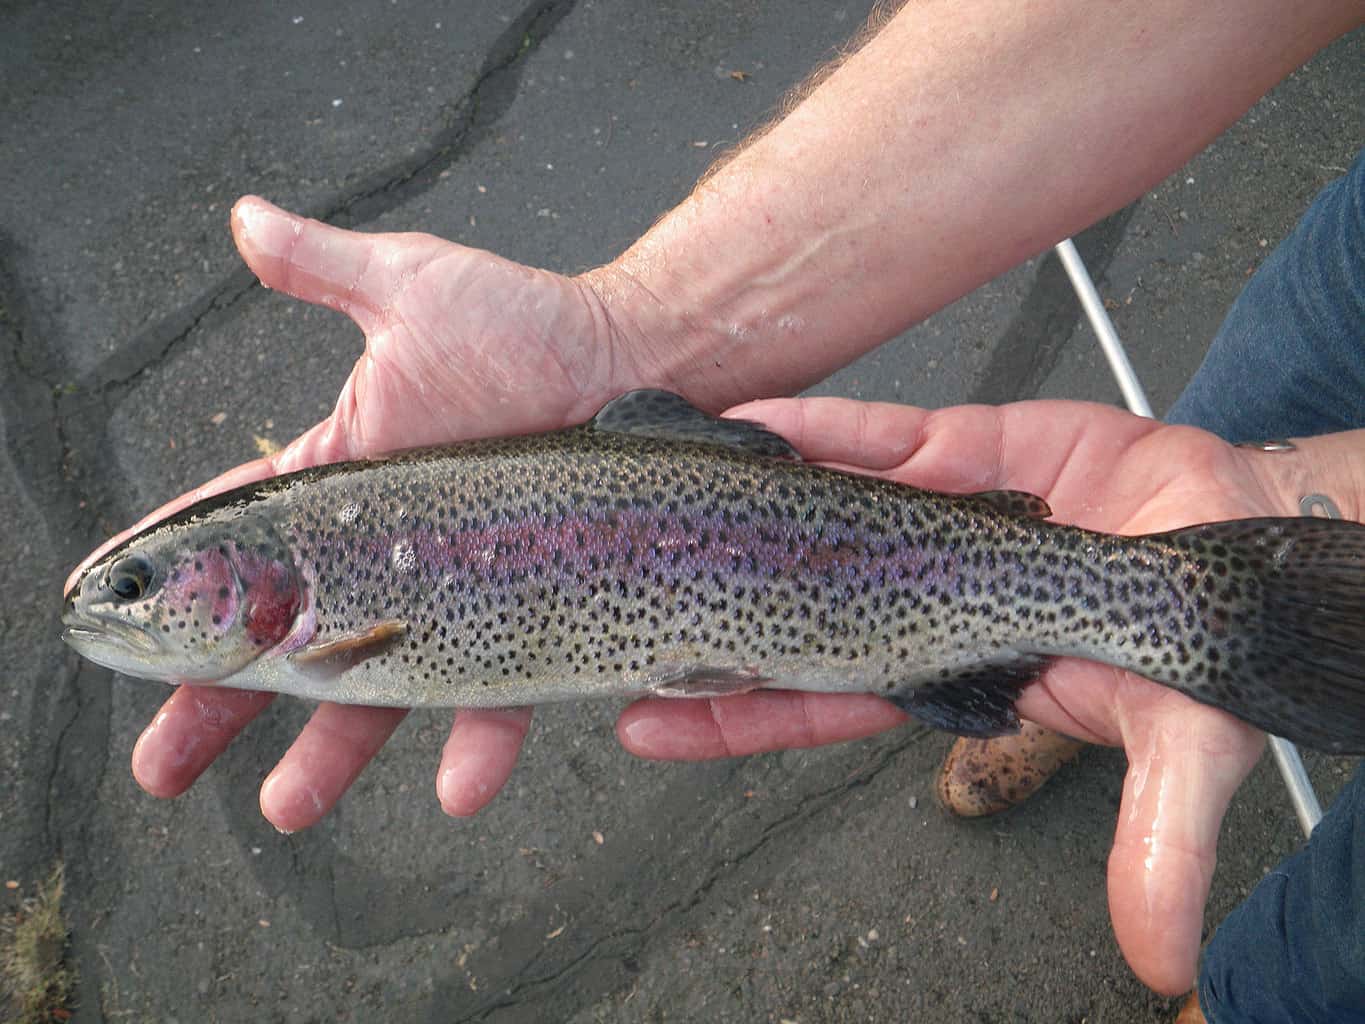 A closeup of a trout being held by an angler.